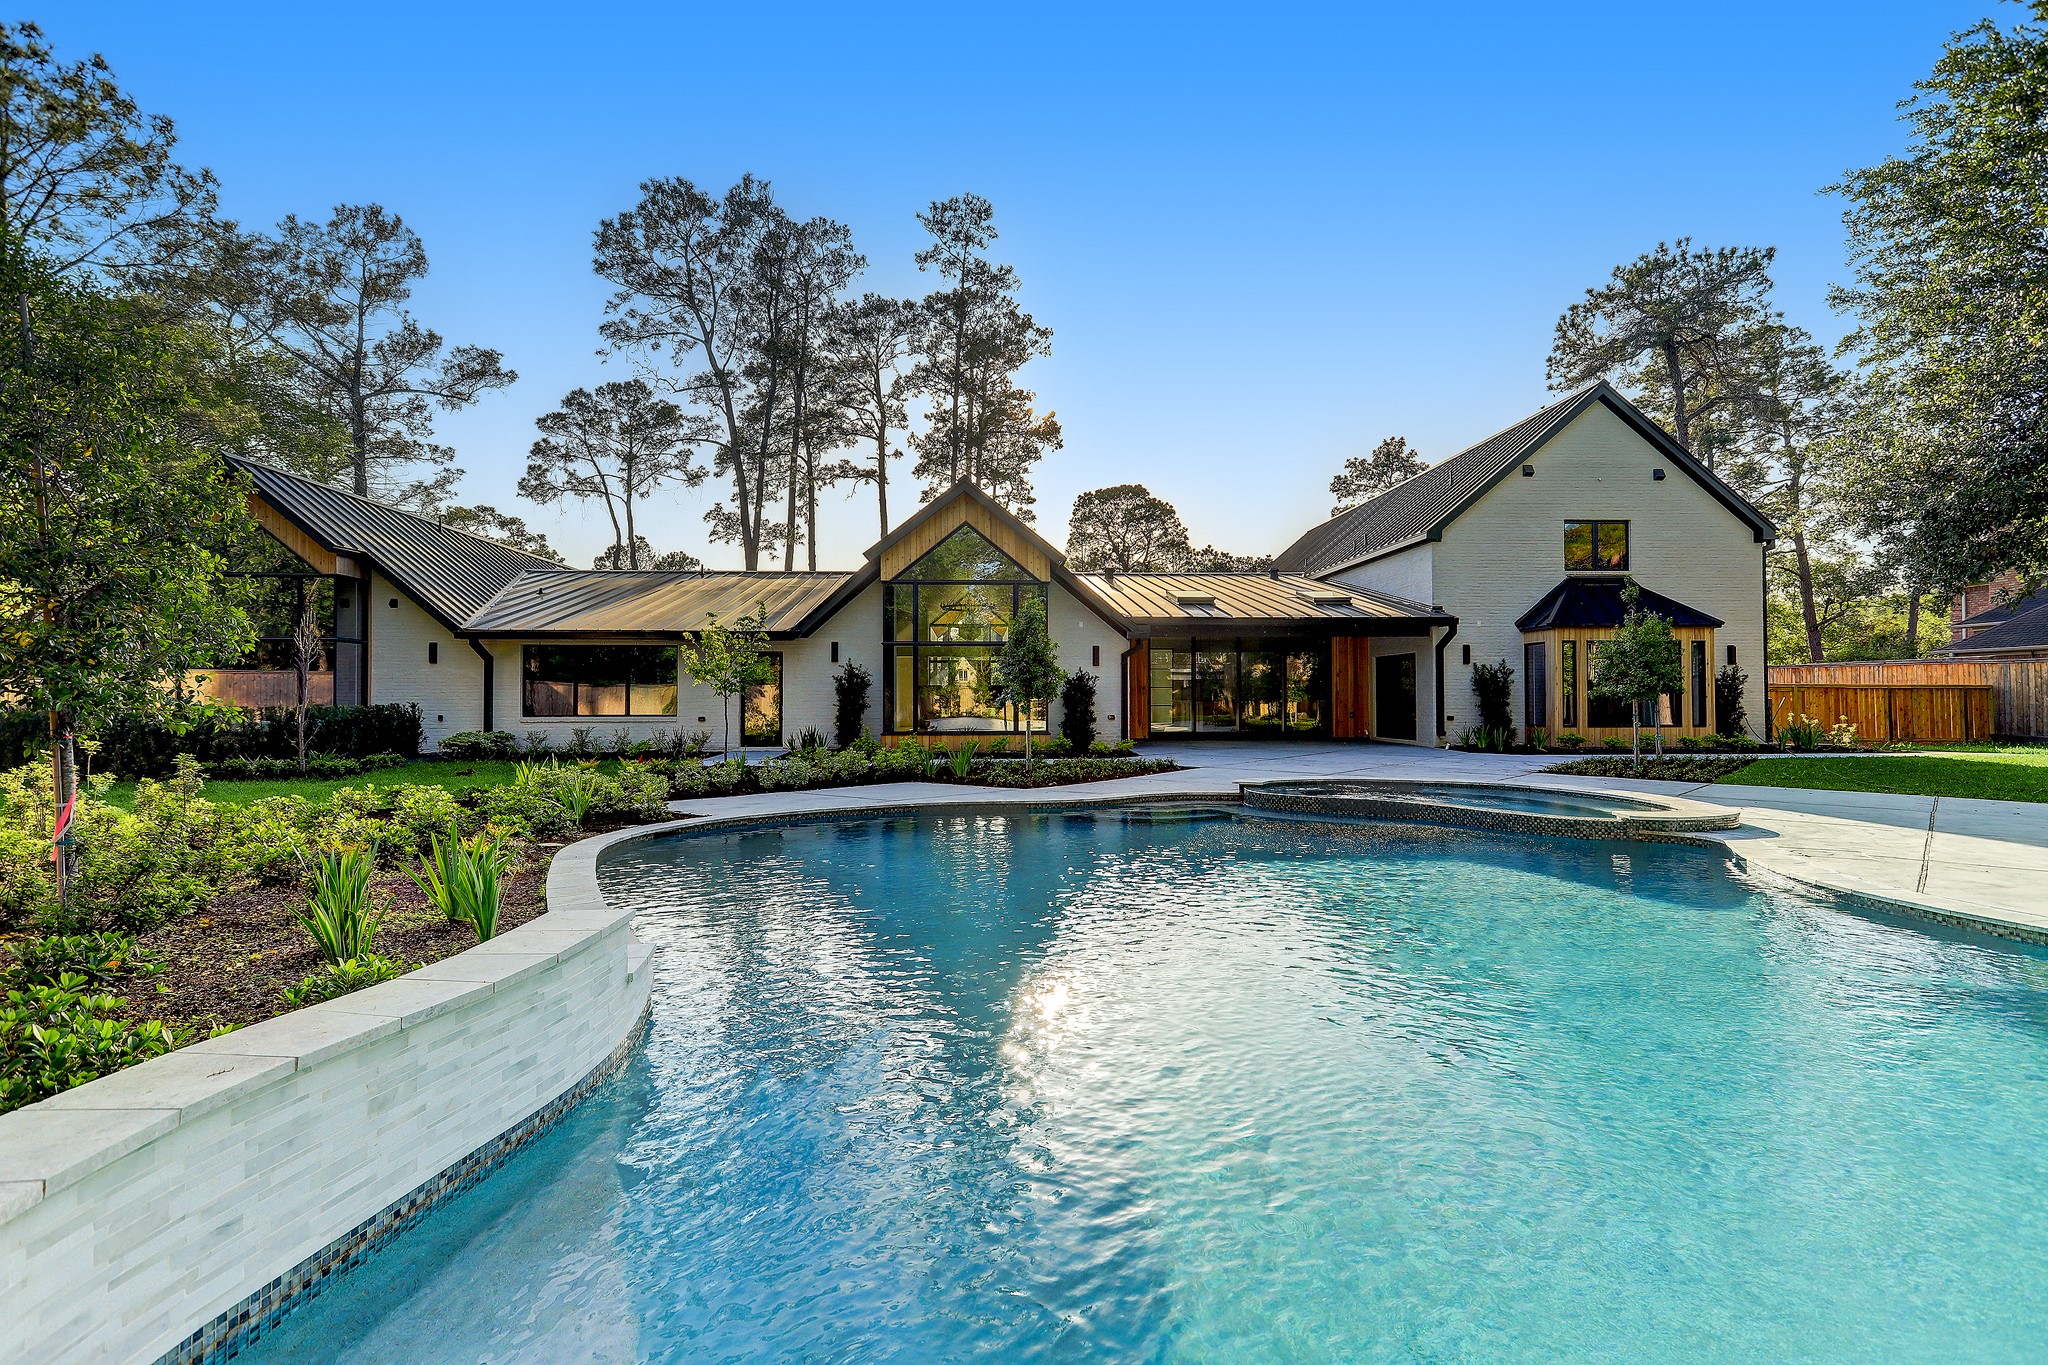 Expertly reconstructed 8,023 sq ft Piney Point showcase home on a 46,187 sq ft lot and built with uncompromising quality rivaling the finest new construction